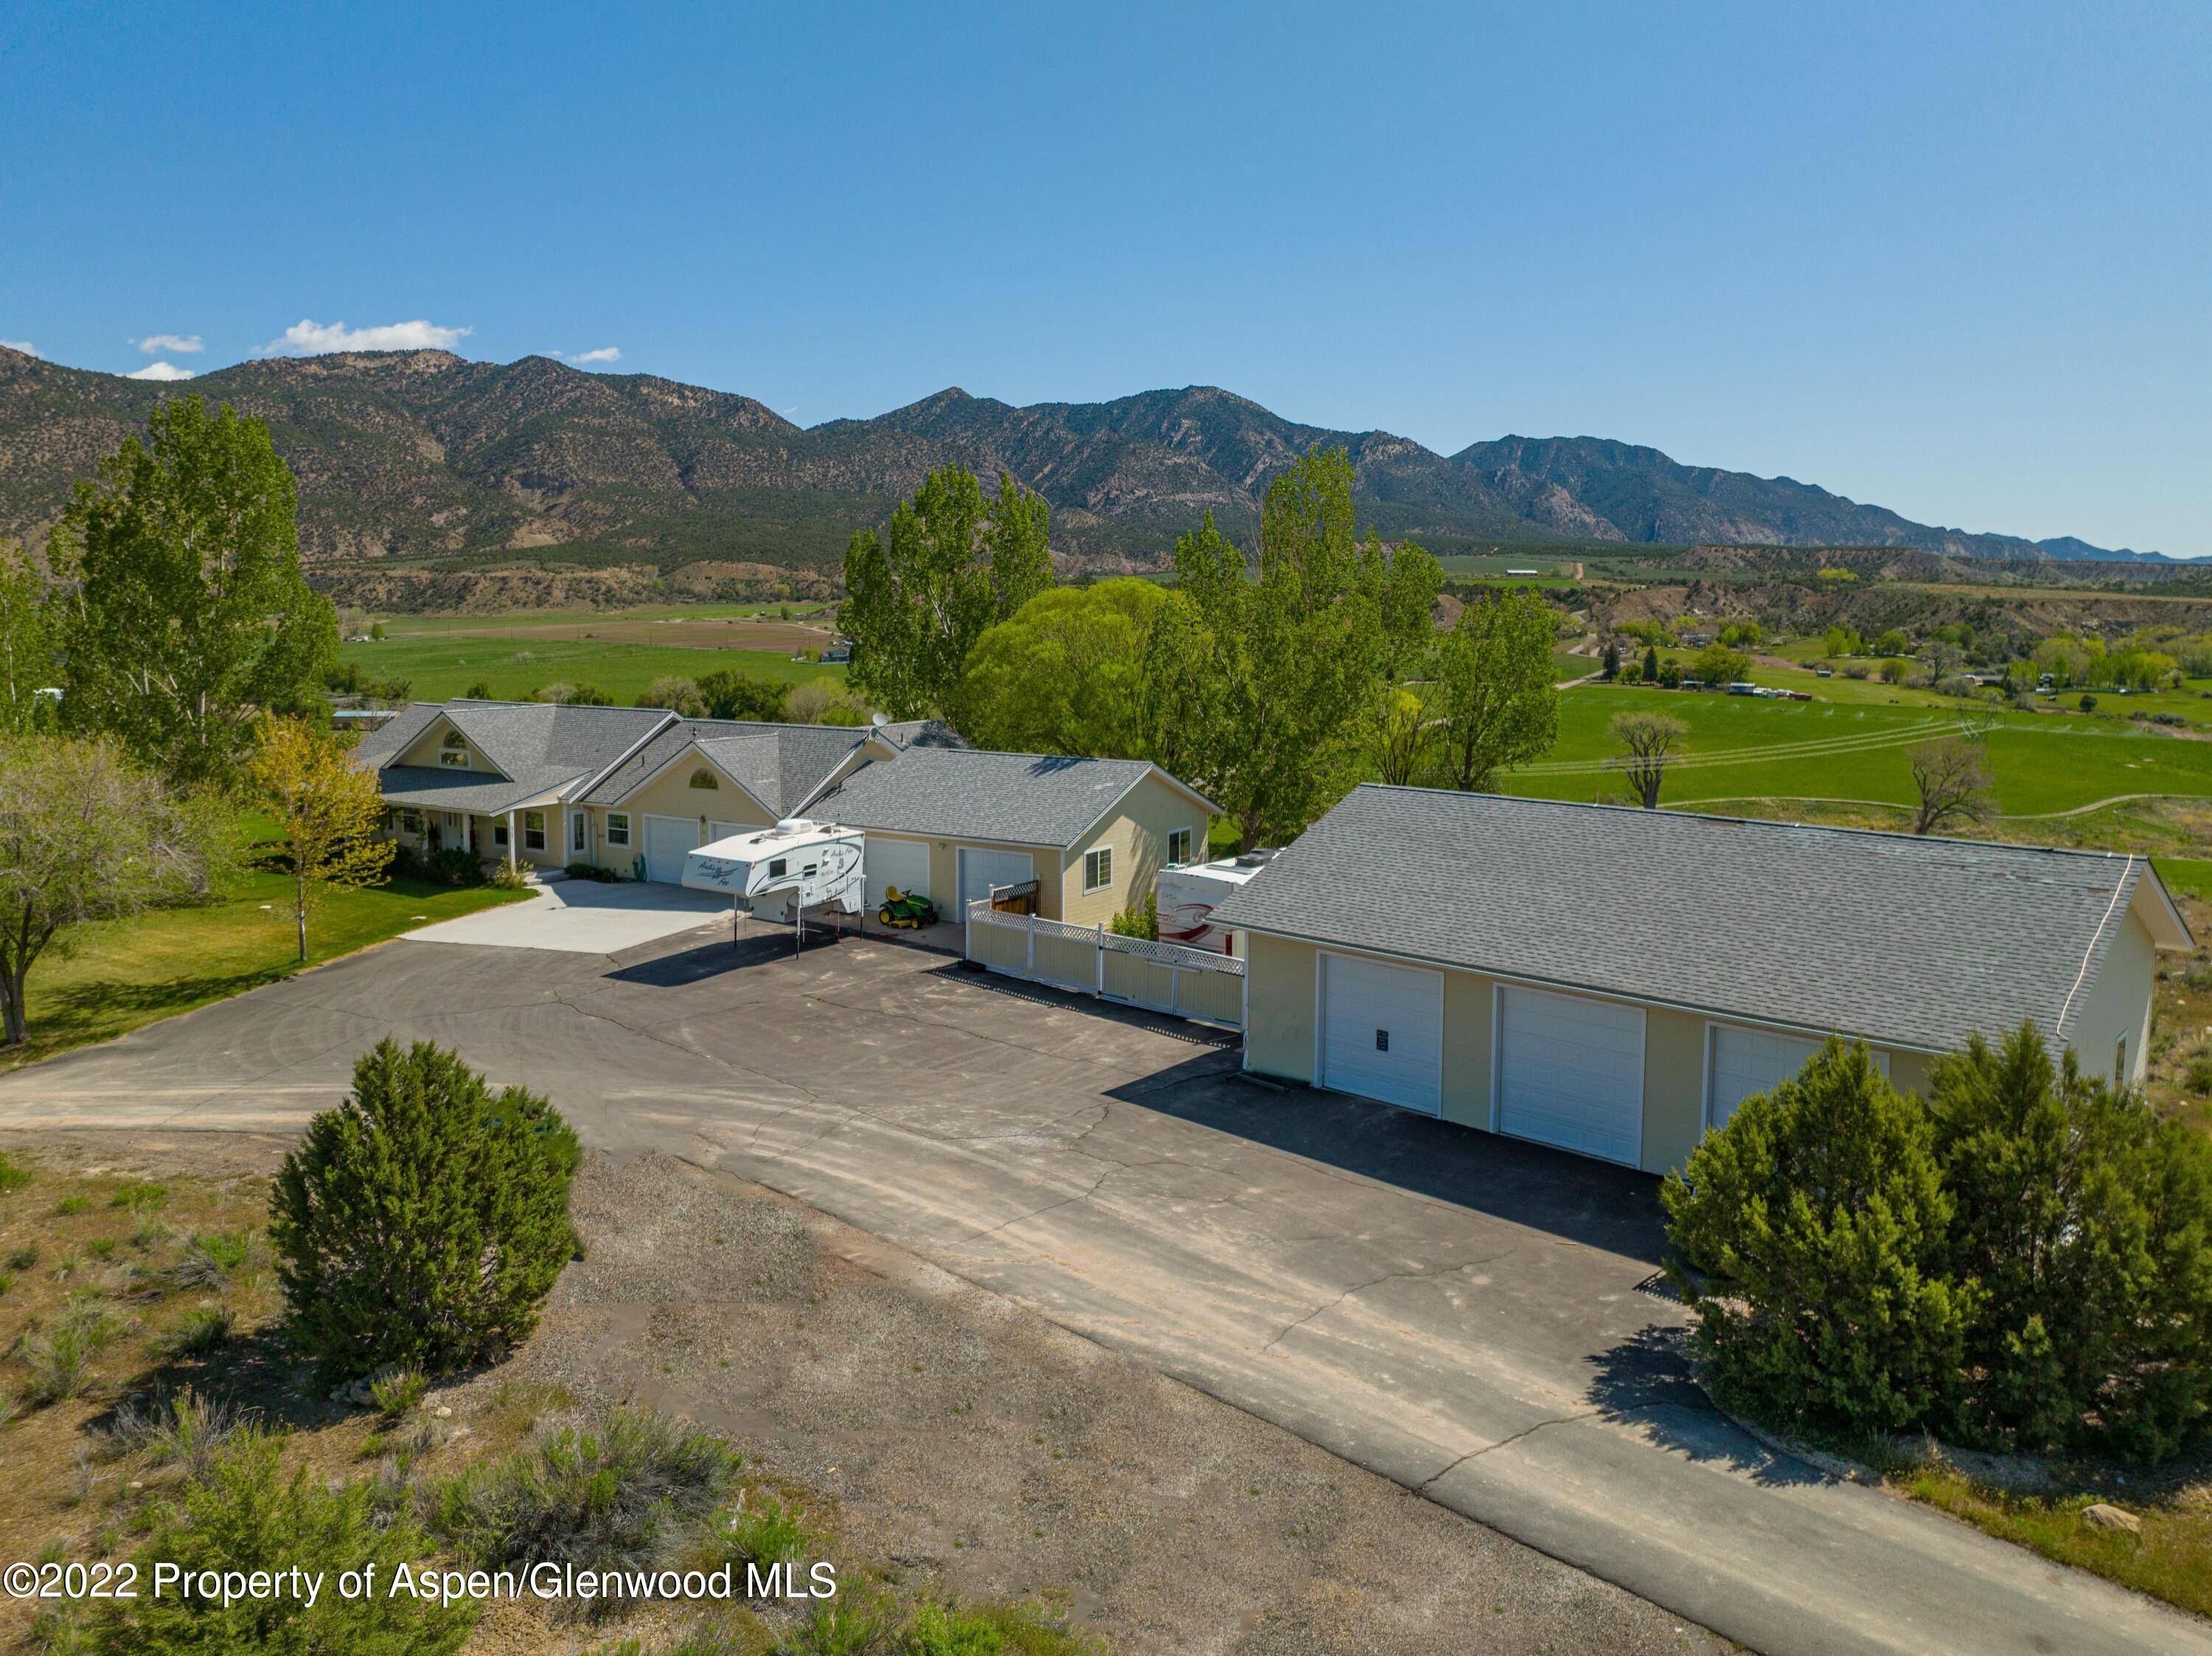 7 7 I'm in Heaven ! ! ! Almost 7 acres, 7 garages, views that will stop you in your tracks.